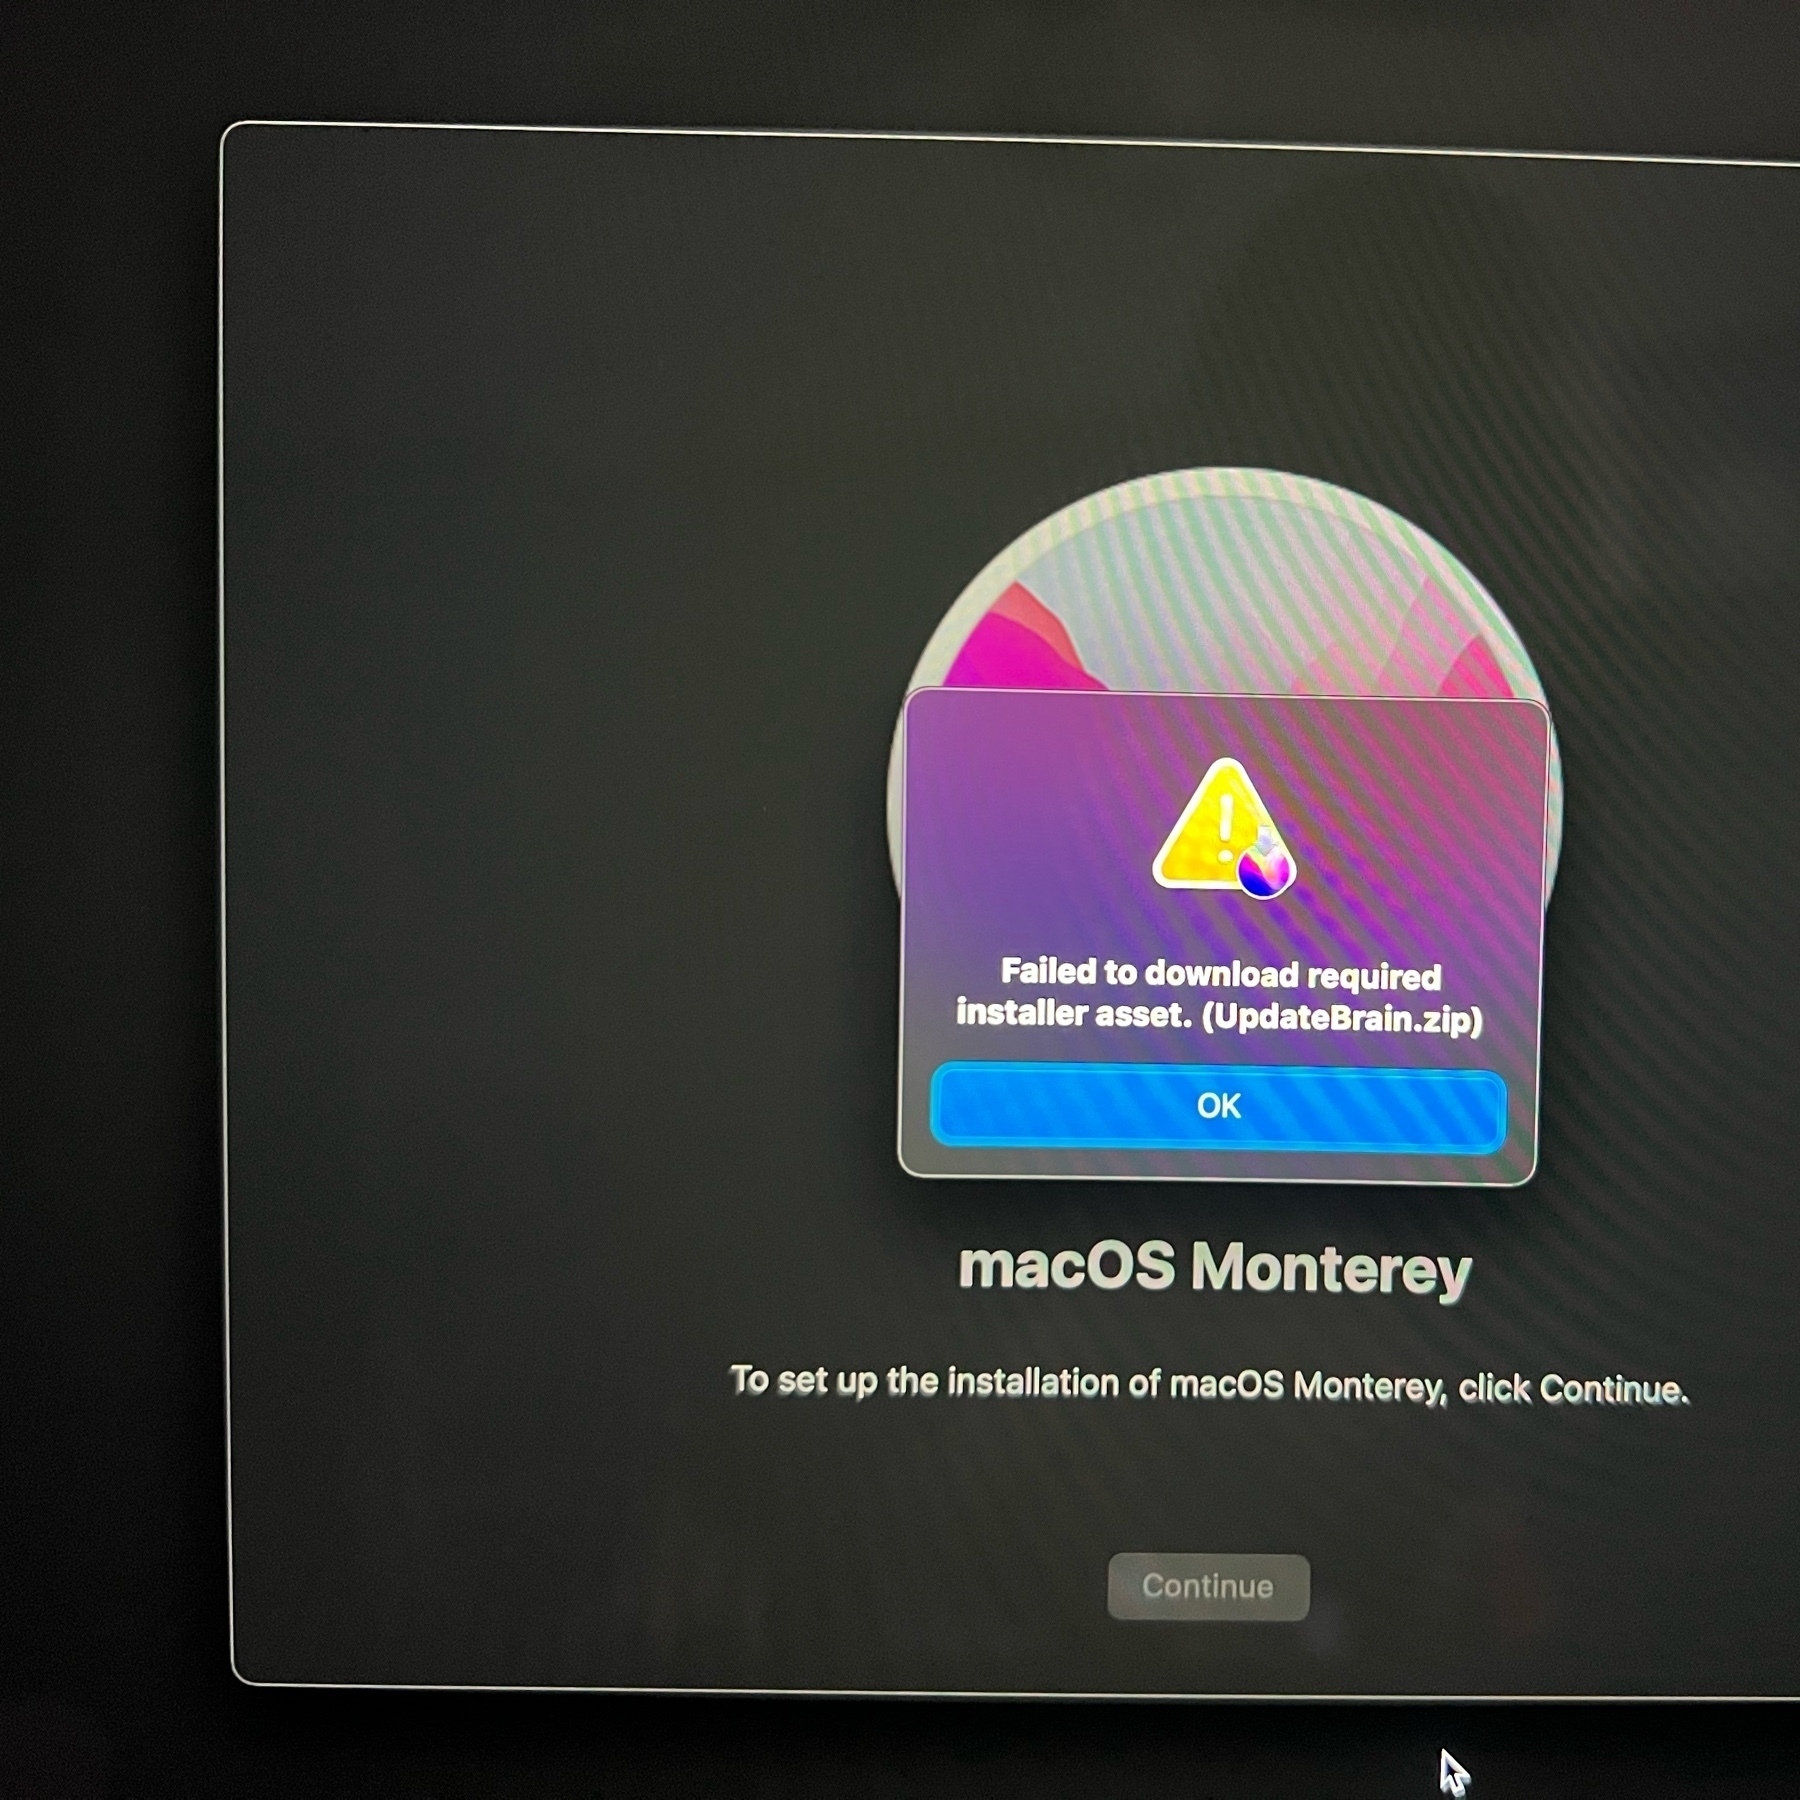 Picture of Mac failing to install is with “UpdateBrain.zip” asset referenced.